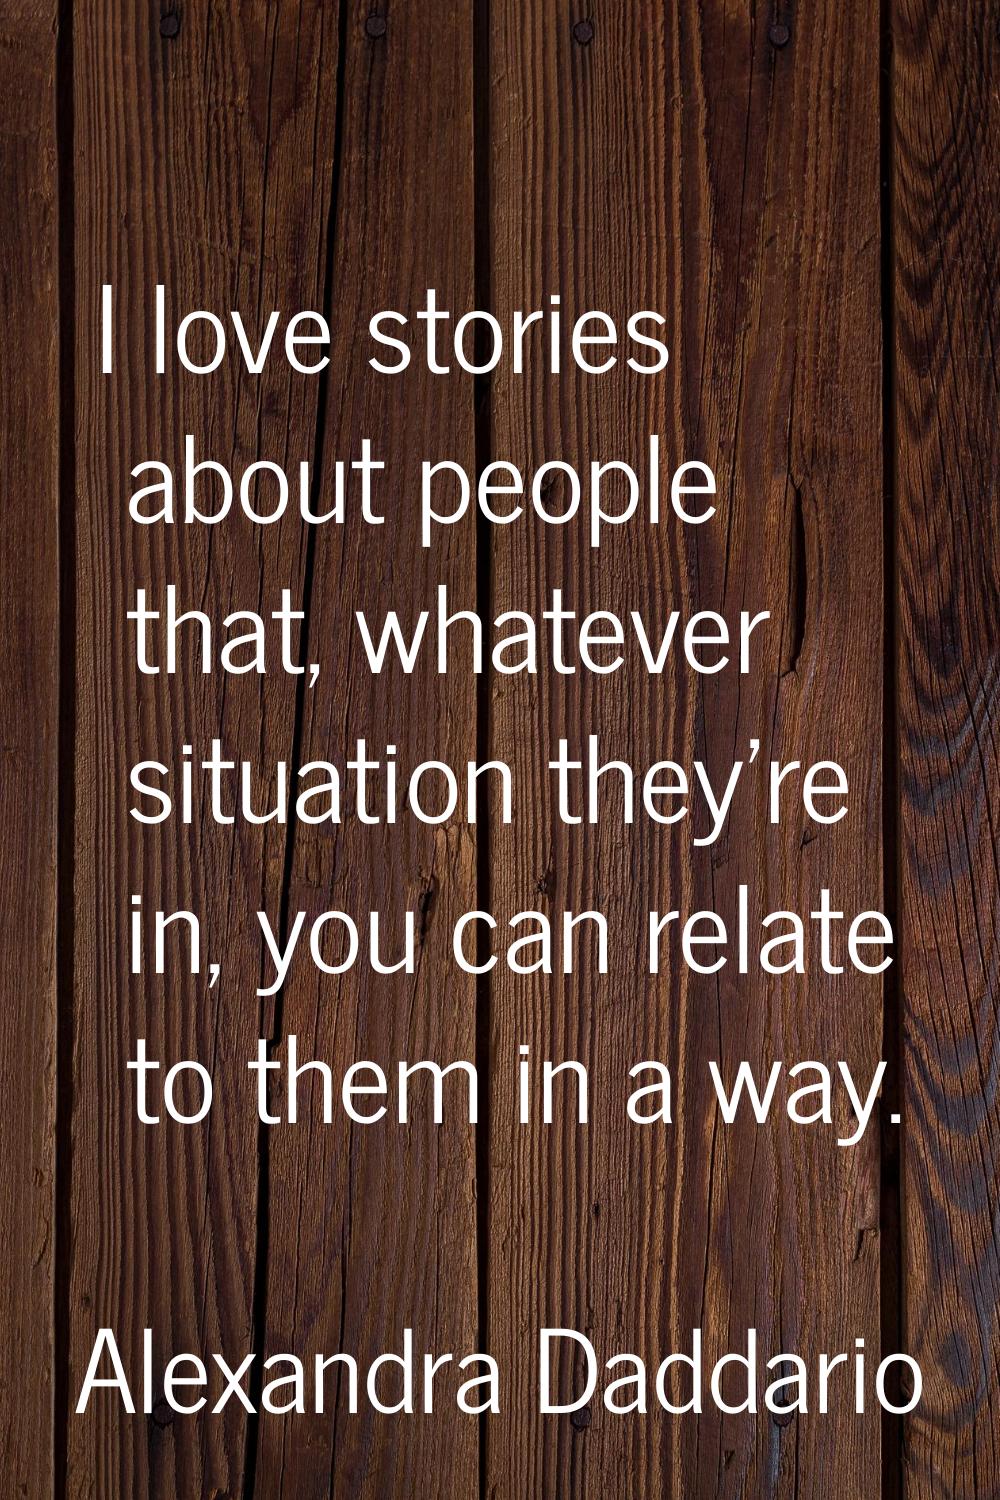 I love stories about people that, whatever situation they're in, you can relate to them in a way.